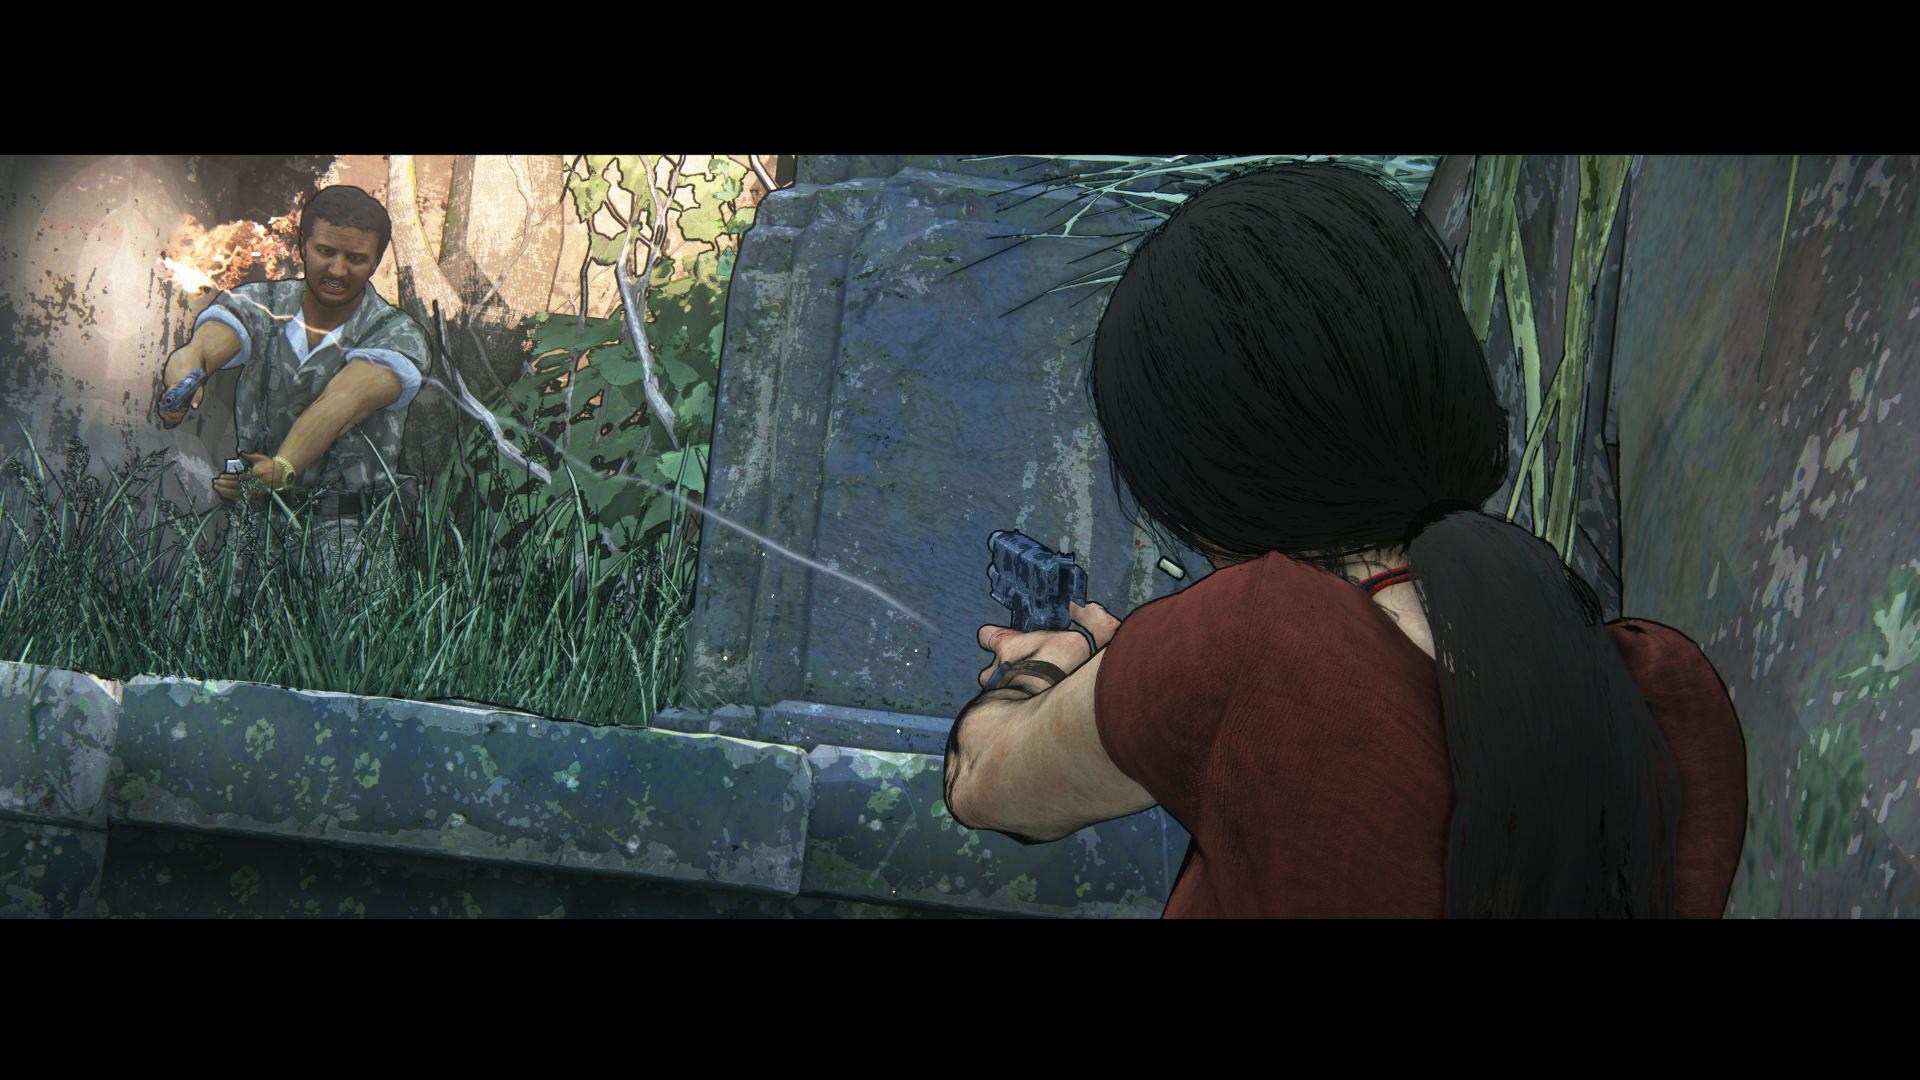 1505207427-uncharted-tm-the-lost-legacy-20170912104504.png